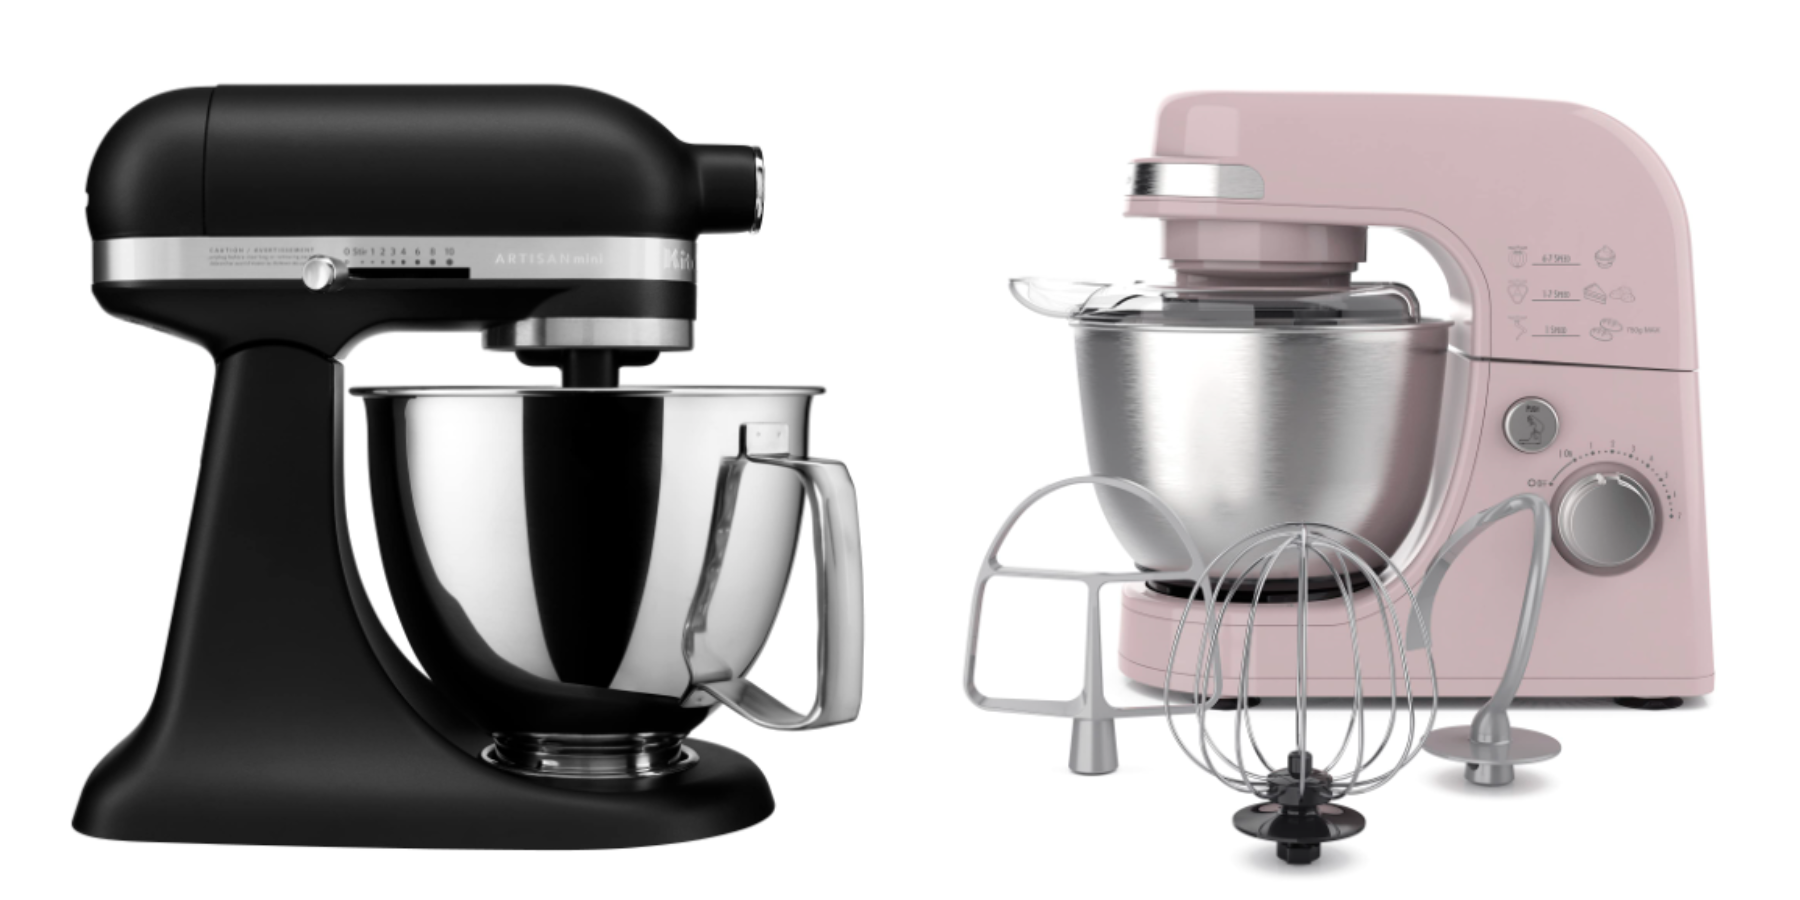 Prime Day 2021: This Dash Mixer Is a KitchenAid Lookalike